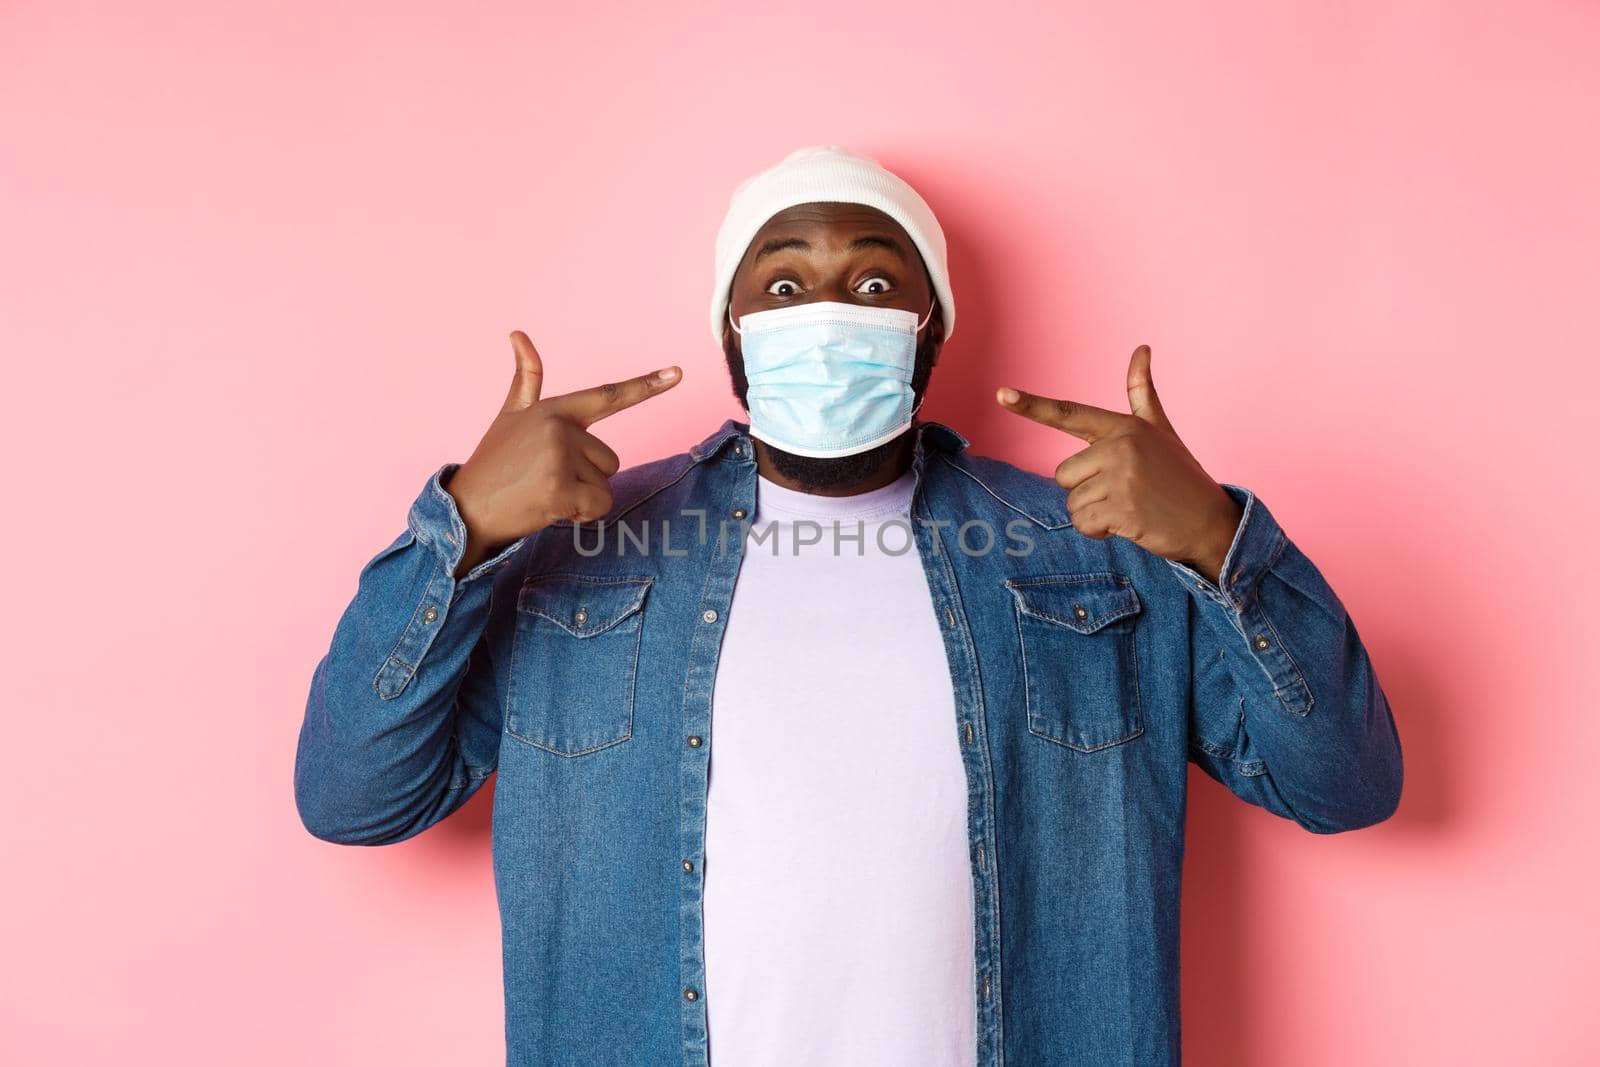 Coronavirus, lifestyle and social distancing concept. Happy Black man in beanie pointing at his face mask, smiling at camera, standing over pink background.